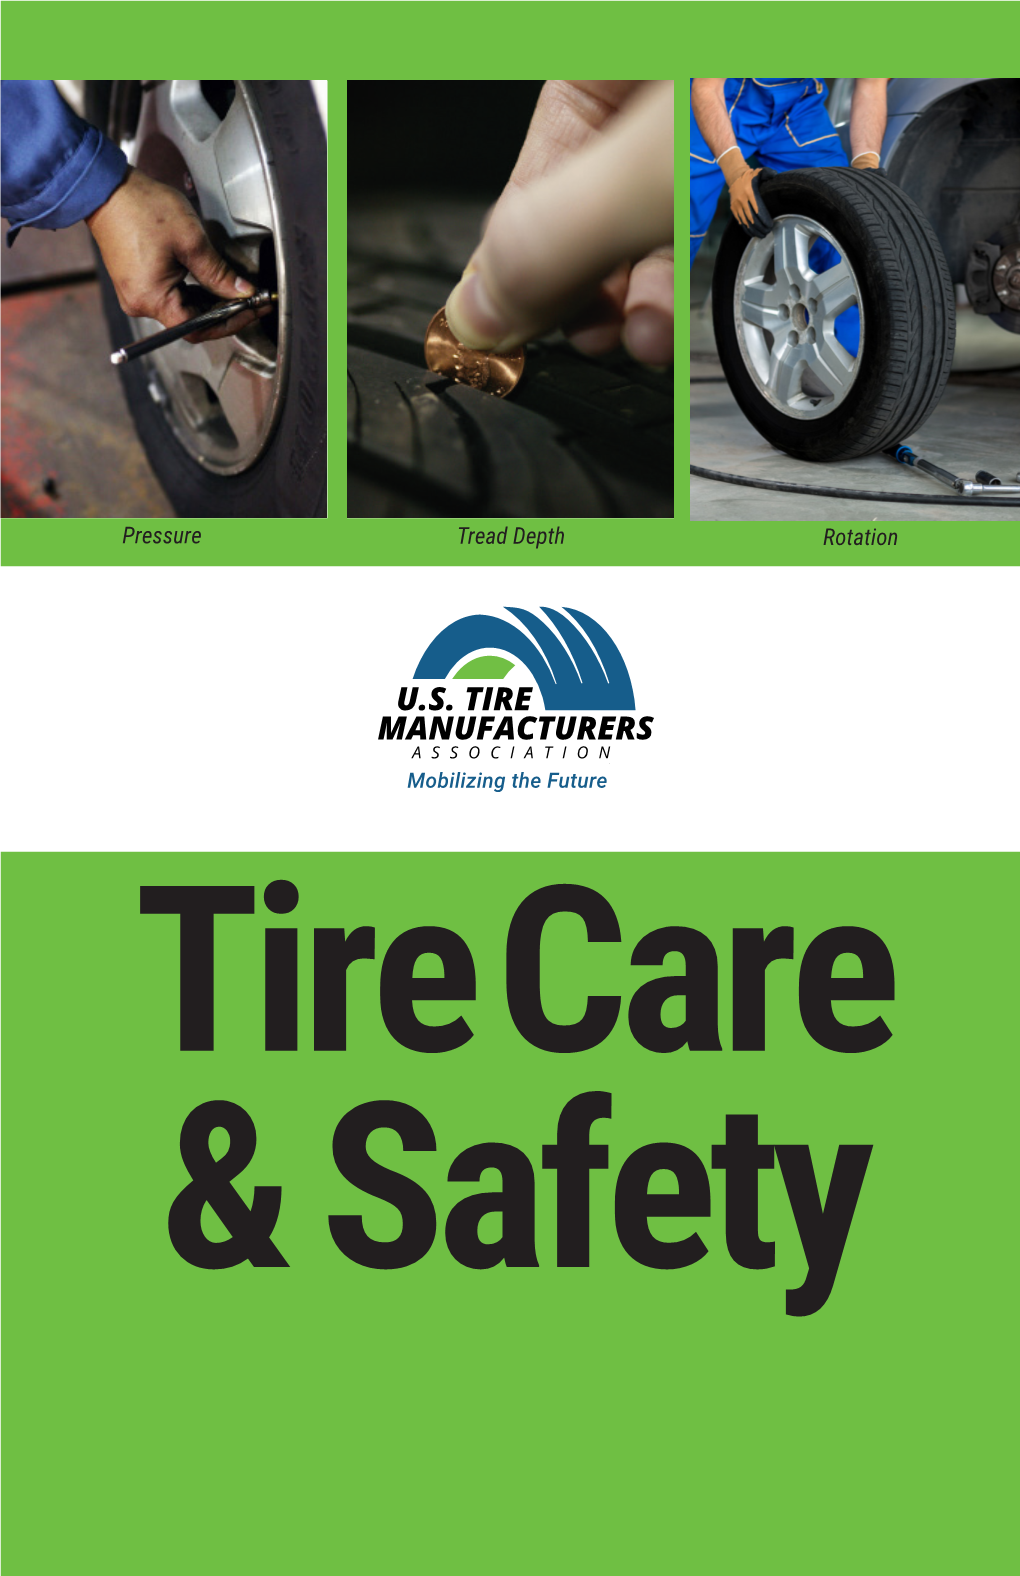 USTMA Tire Care and Safety Guide